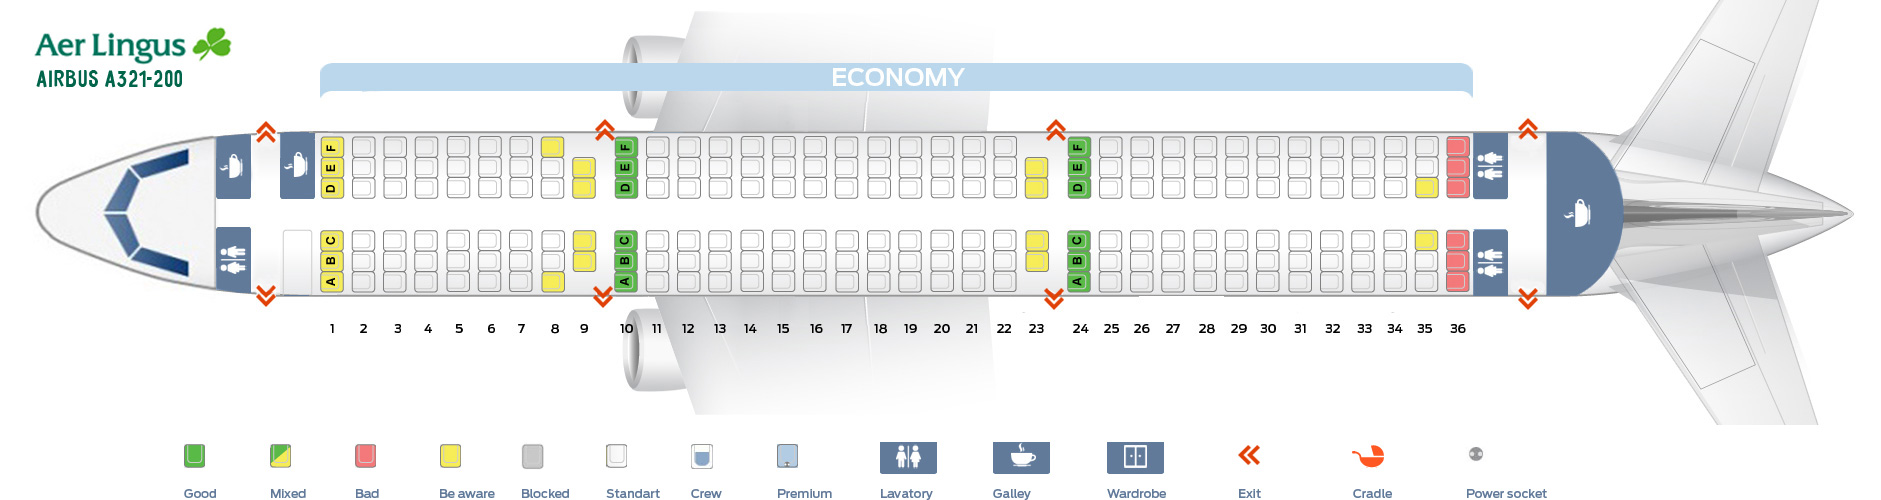 Seat map Airbus A321-200 Aer Lingus